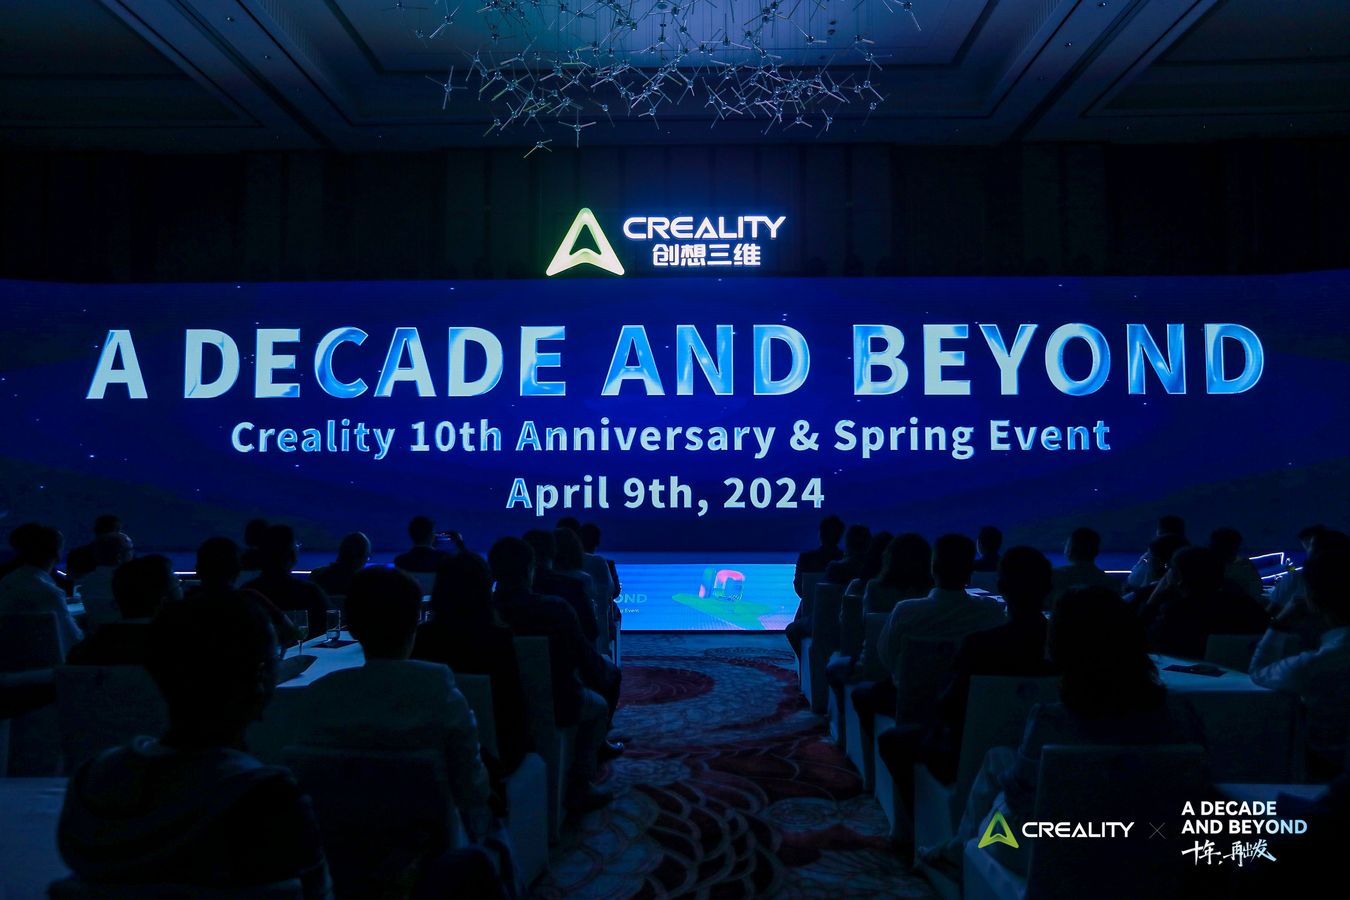 Crelity 10 year aniversarry5 result | “A Decade and Beyond”: Creality’s 10 Years of Innovation and Community Engagement